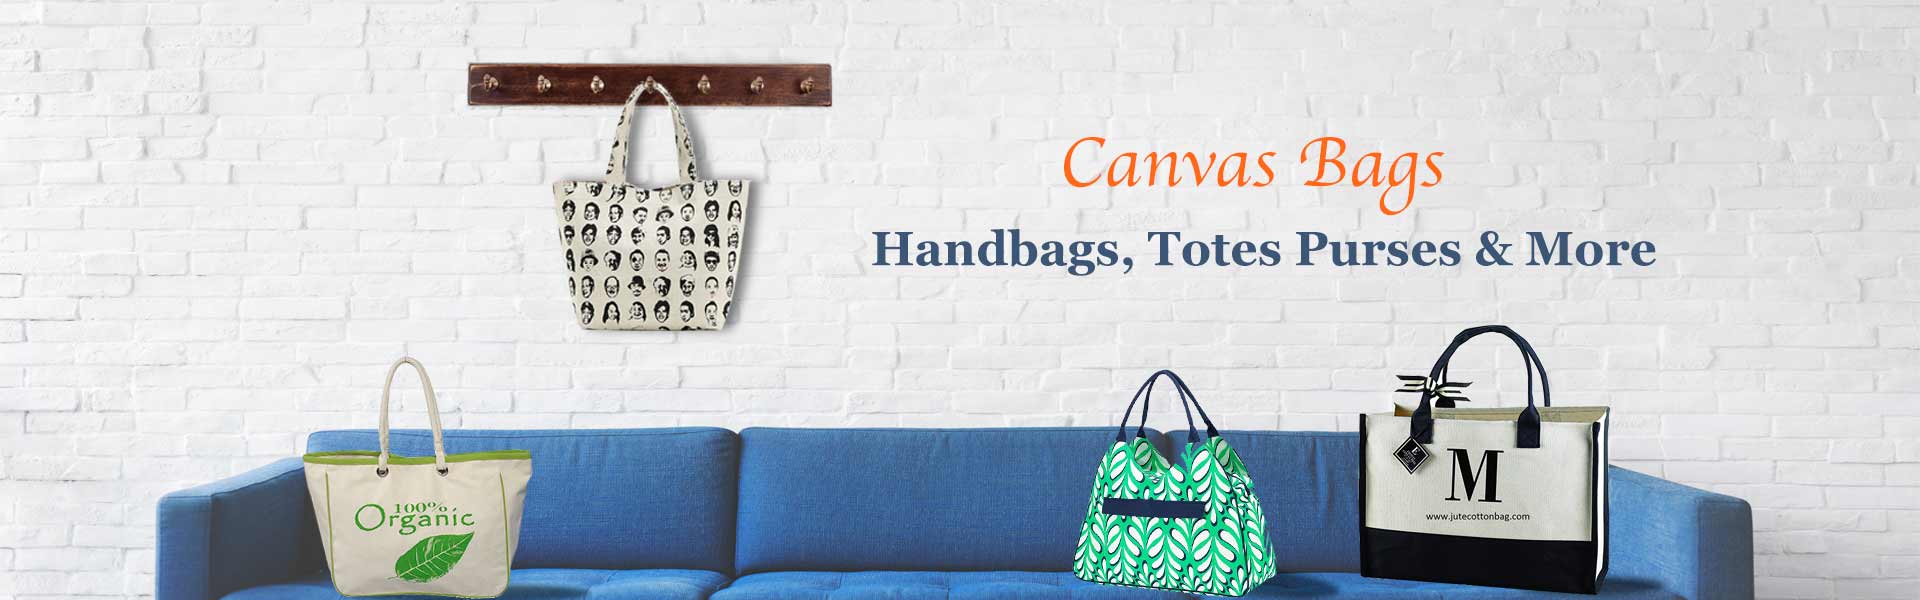 Wholesale Canvas Bags Supplier in Los Angeles